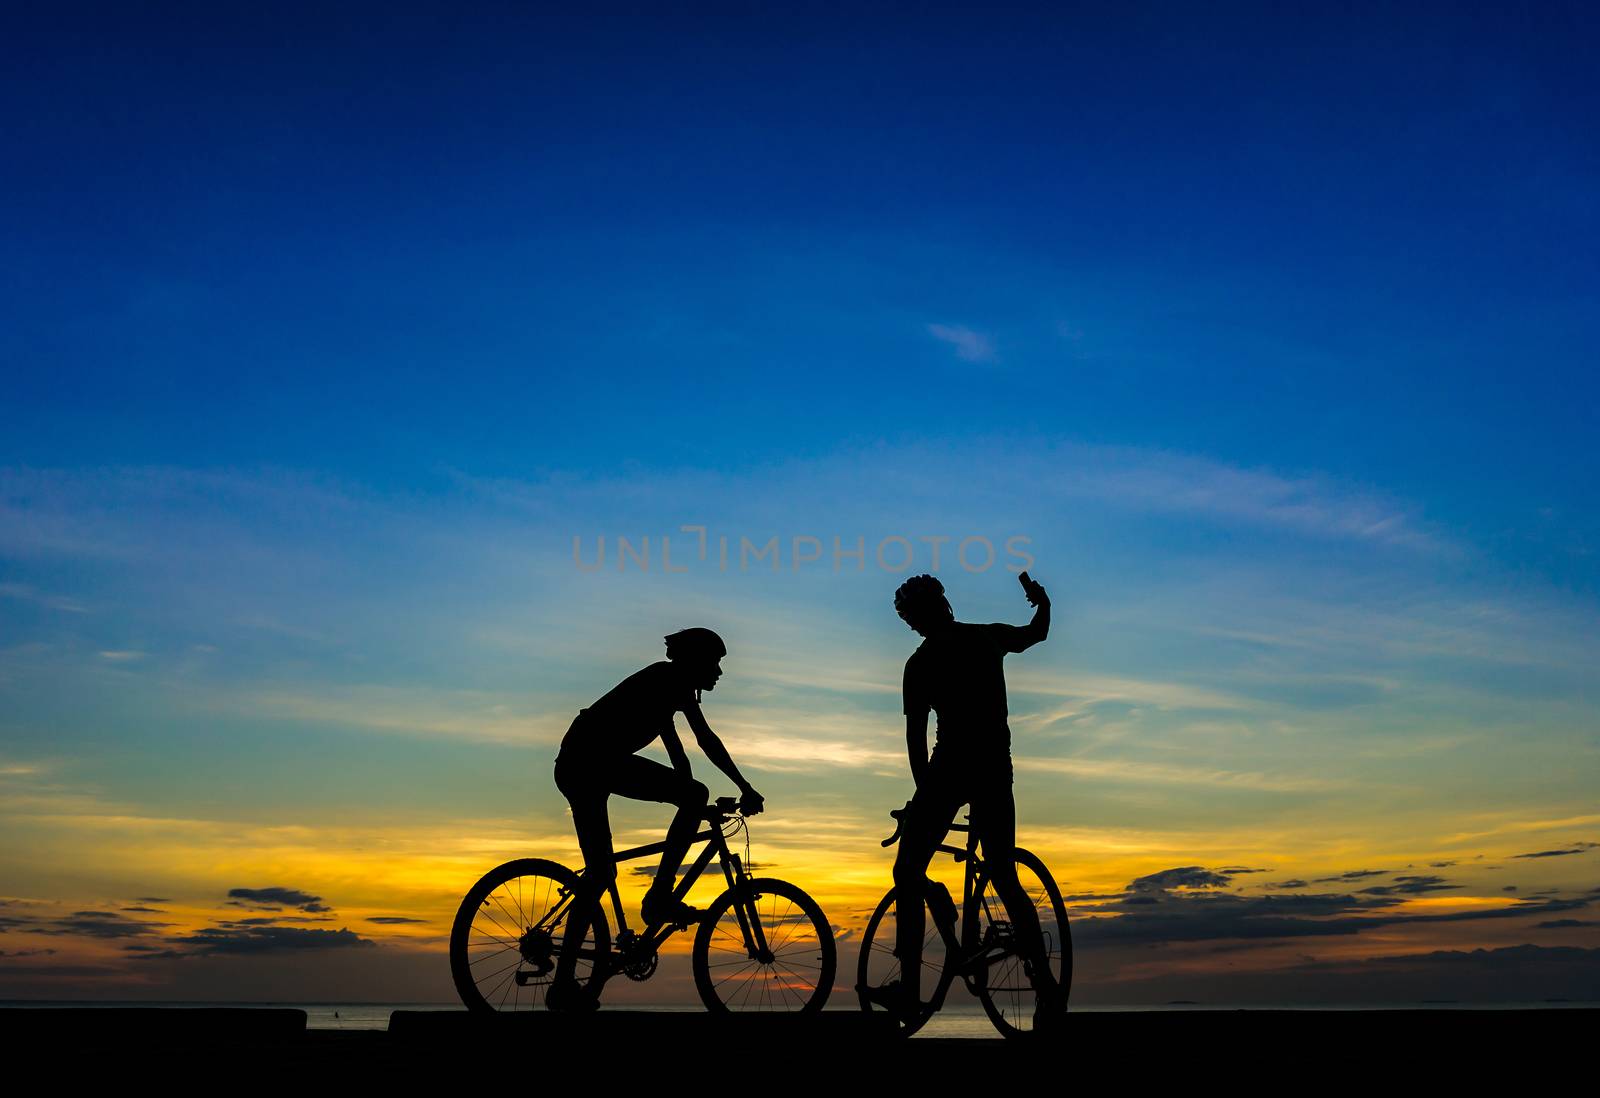 Cyclists with bicycles at the beach, at dusk. by littlekop